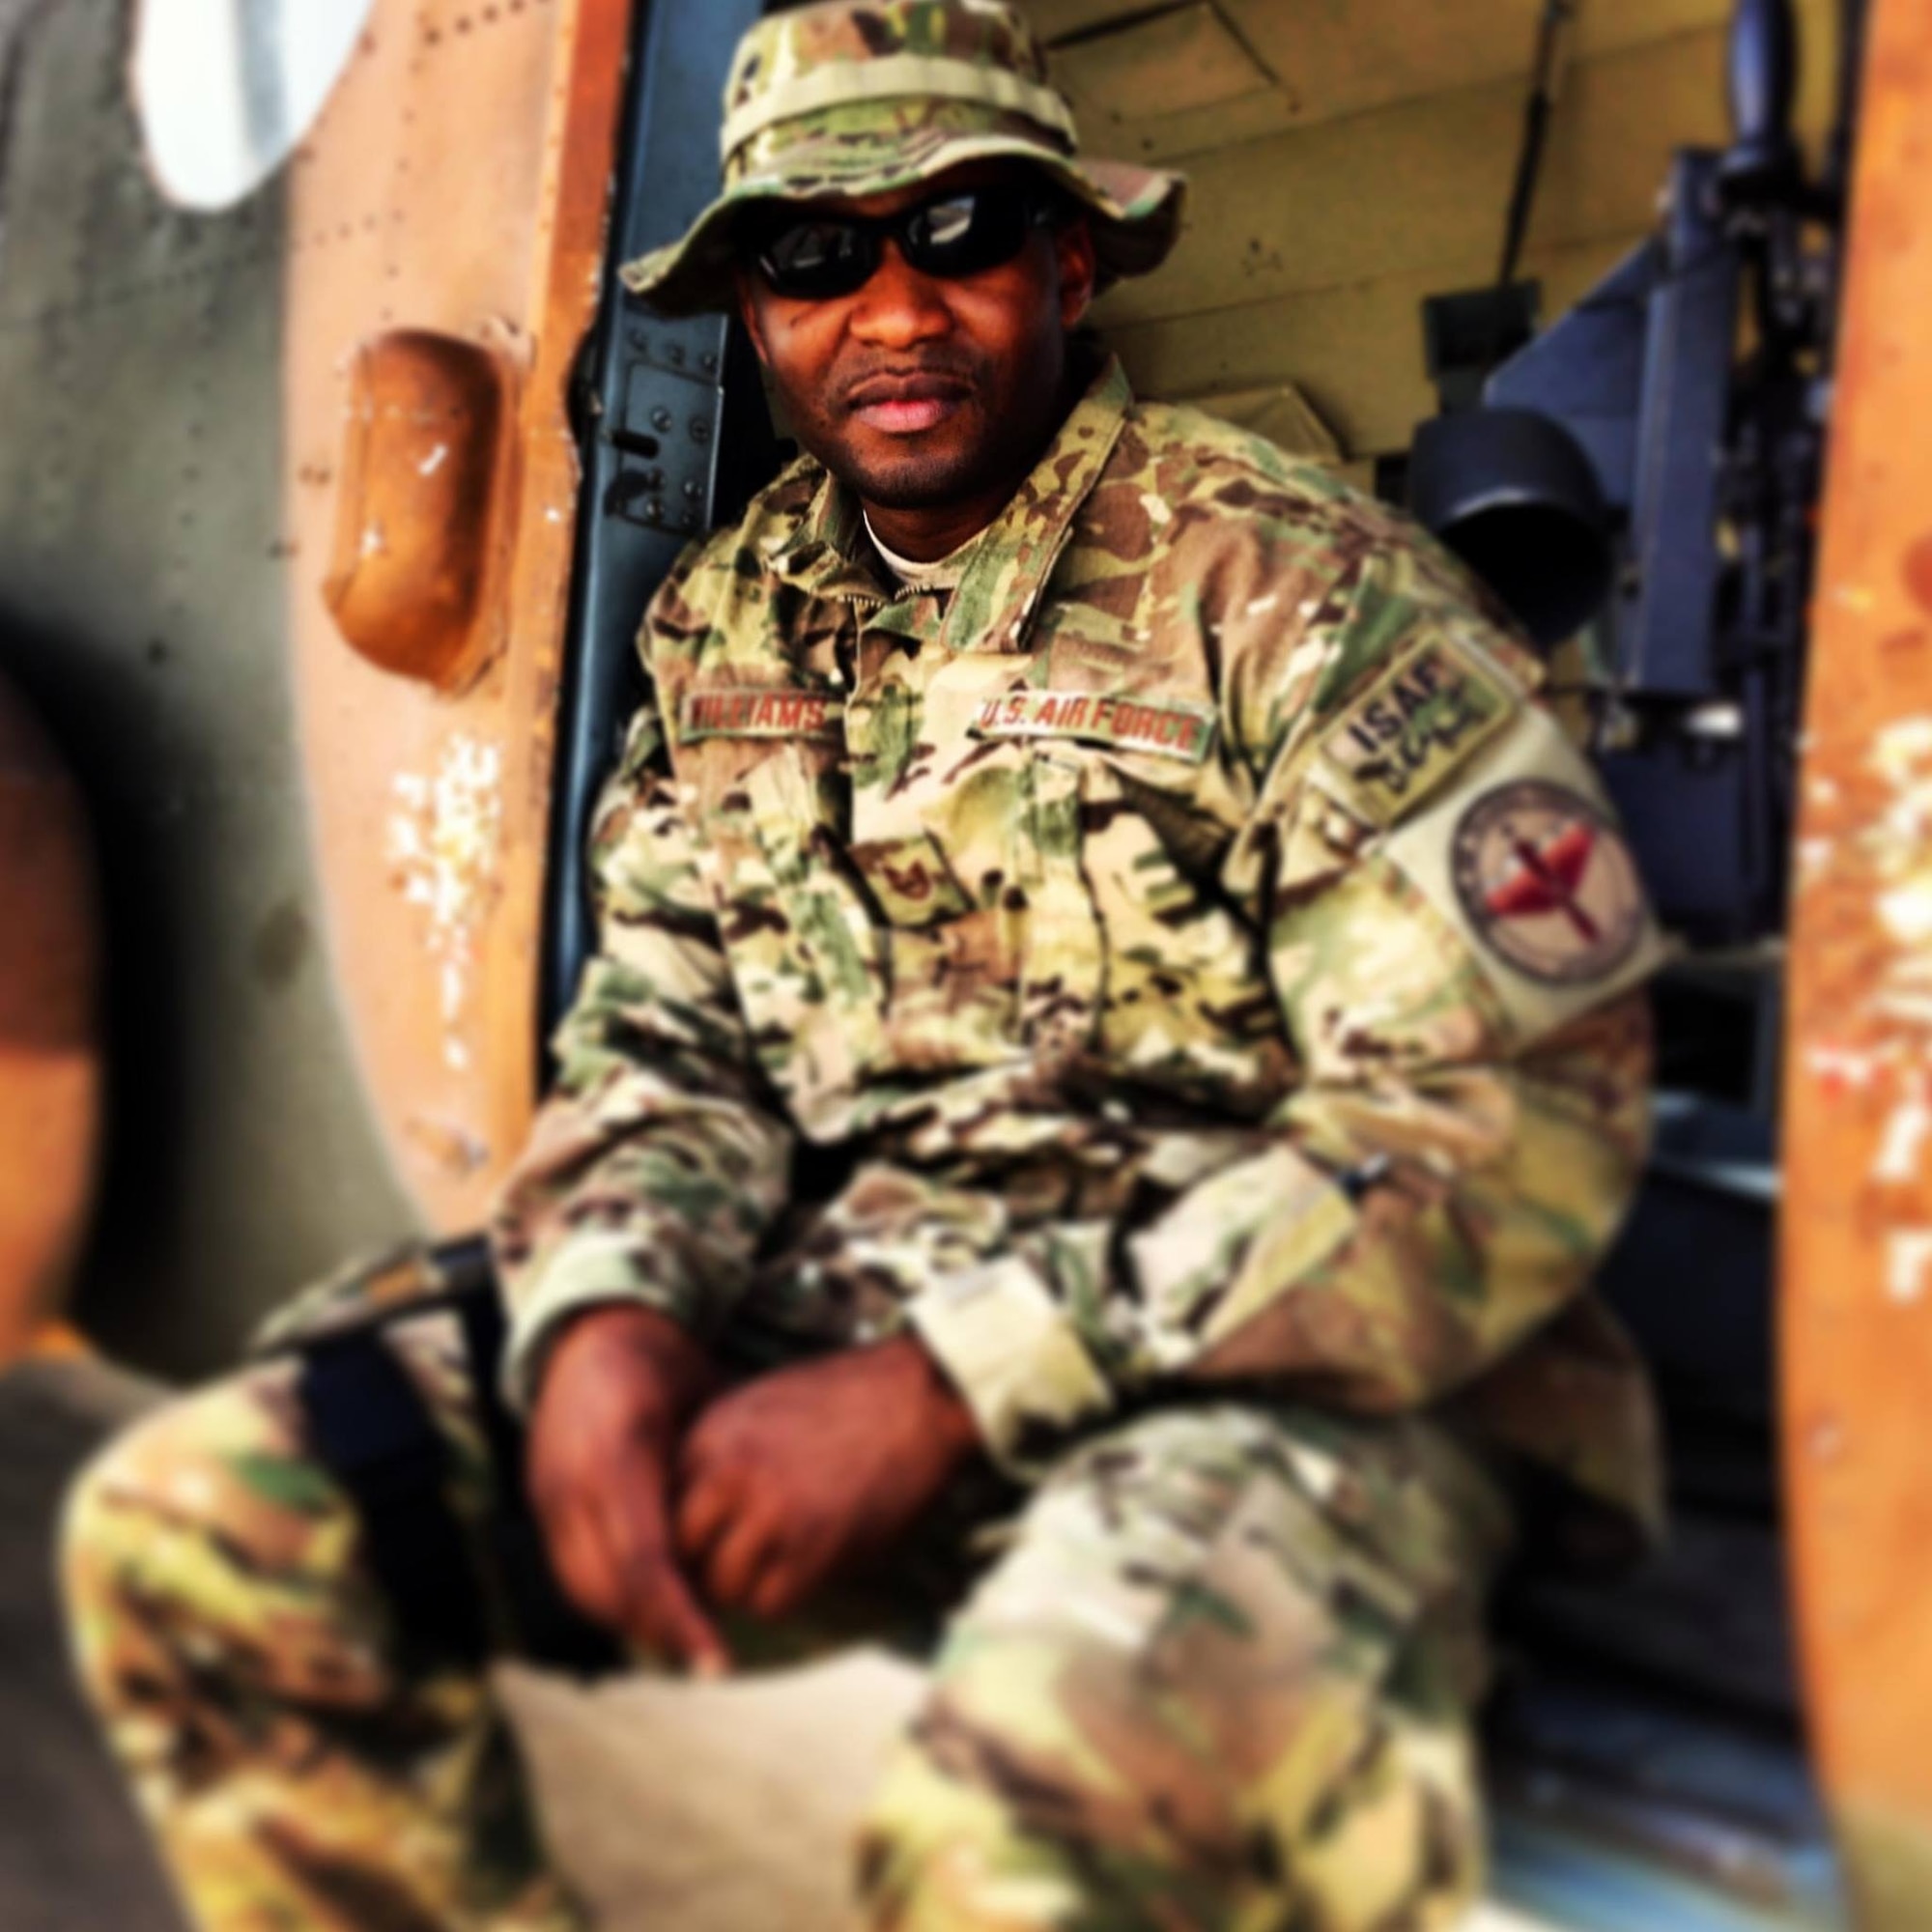 Tech. Sgt. Sherrod Williams during his deployment to Afghanistan. He experienced ups and downs, but hopes to one day return and finish the work he started there. (Courtesy Photo)